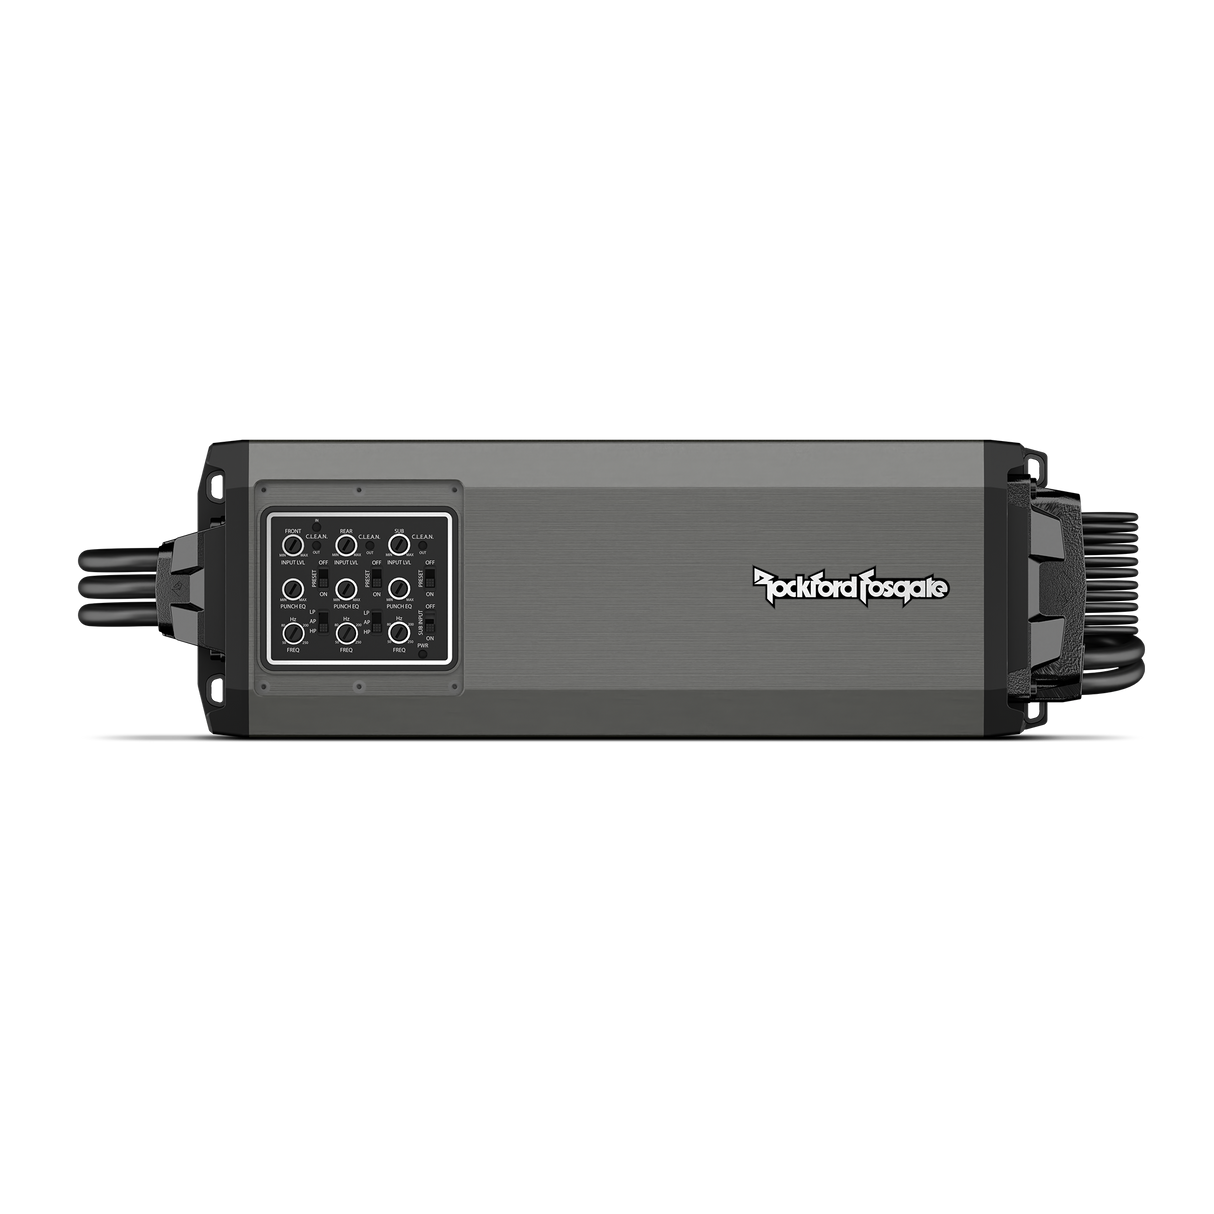 Rockford Fosgate  1,500 Watt 5-Channel IPX6 Element Ready™ Amplifier M5-1500X5 Amplifier Front View with Protective Cover Installed